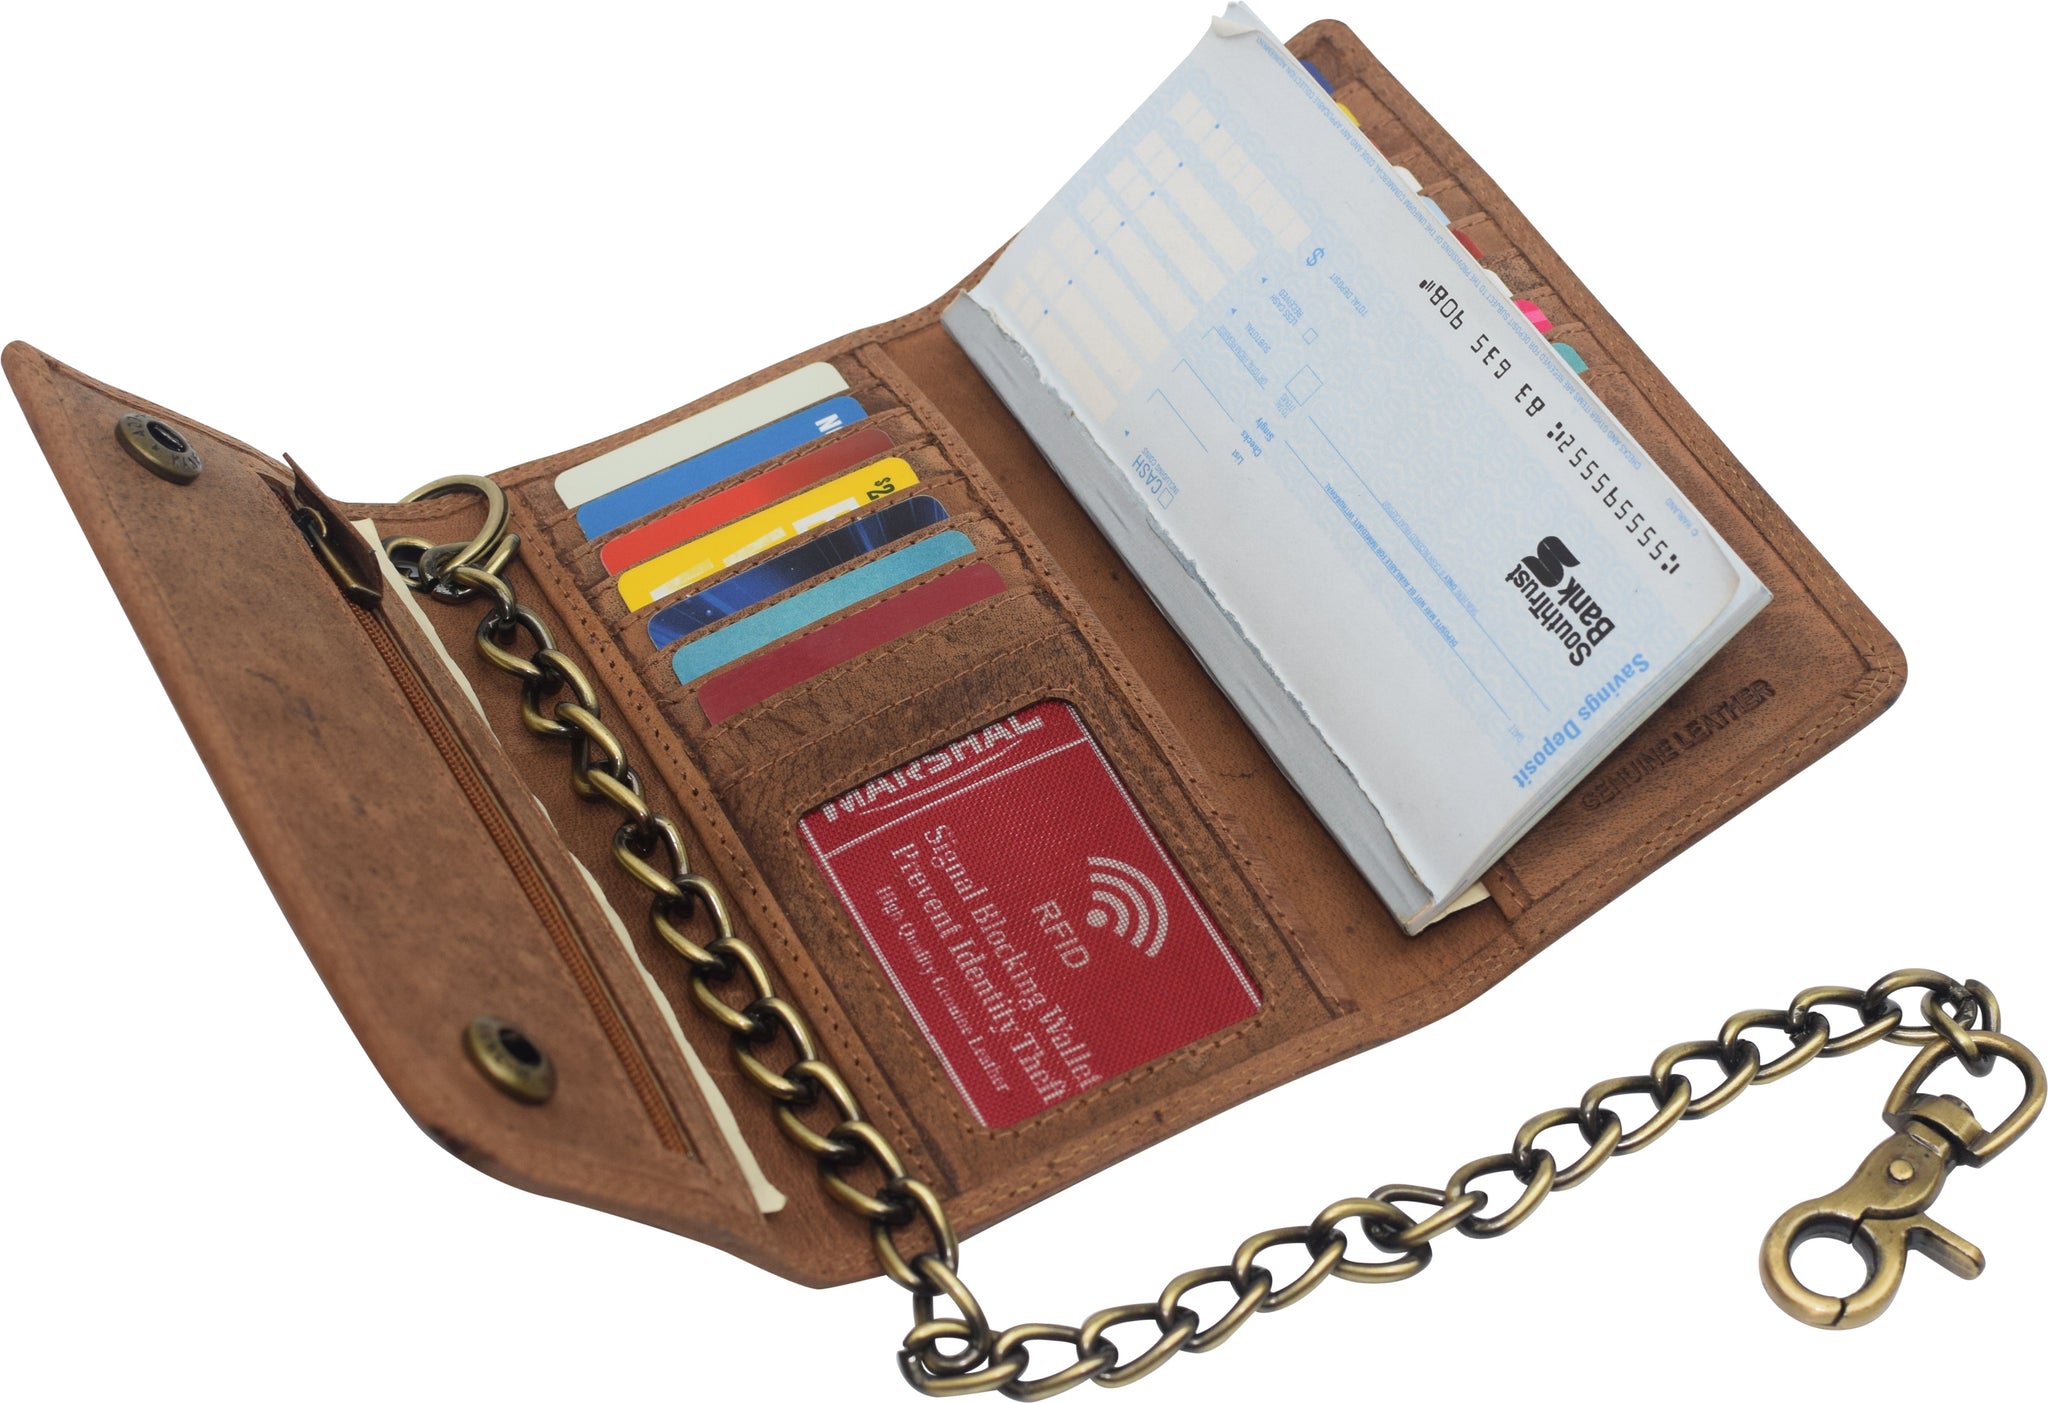 Marshal Genuine Leather Men's Chain Biker Wallet Long Bifold Checkbook RFID Blocking Wallets for Men Tan with Chain